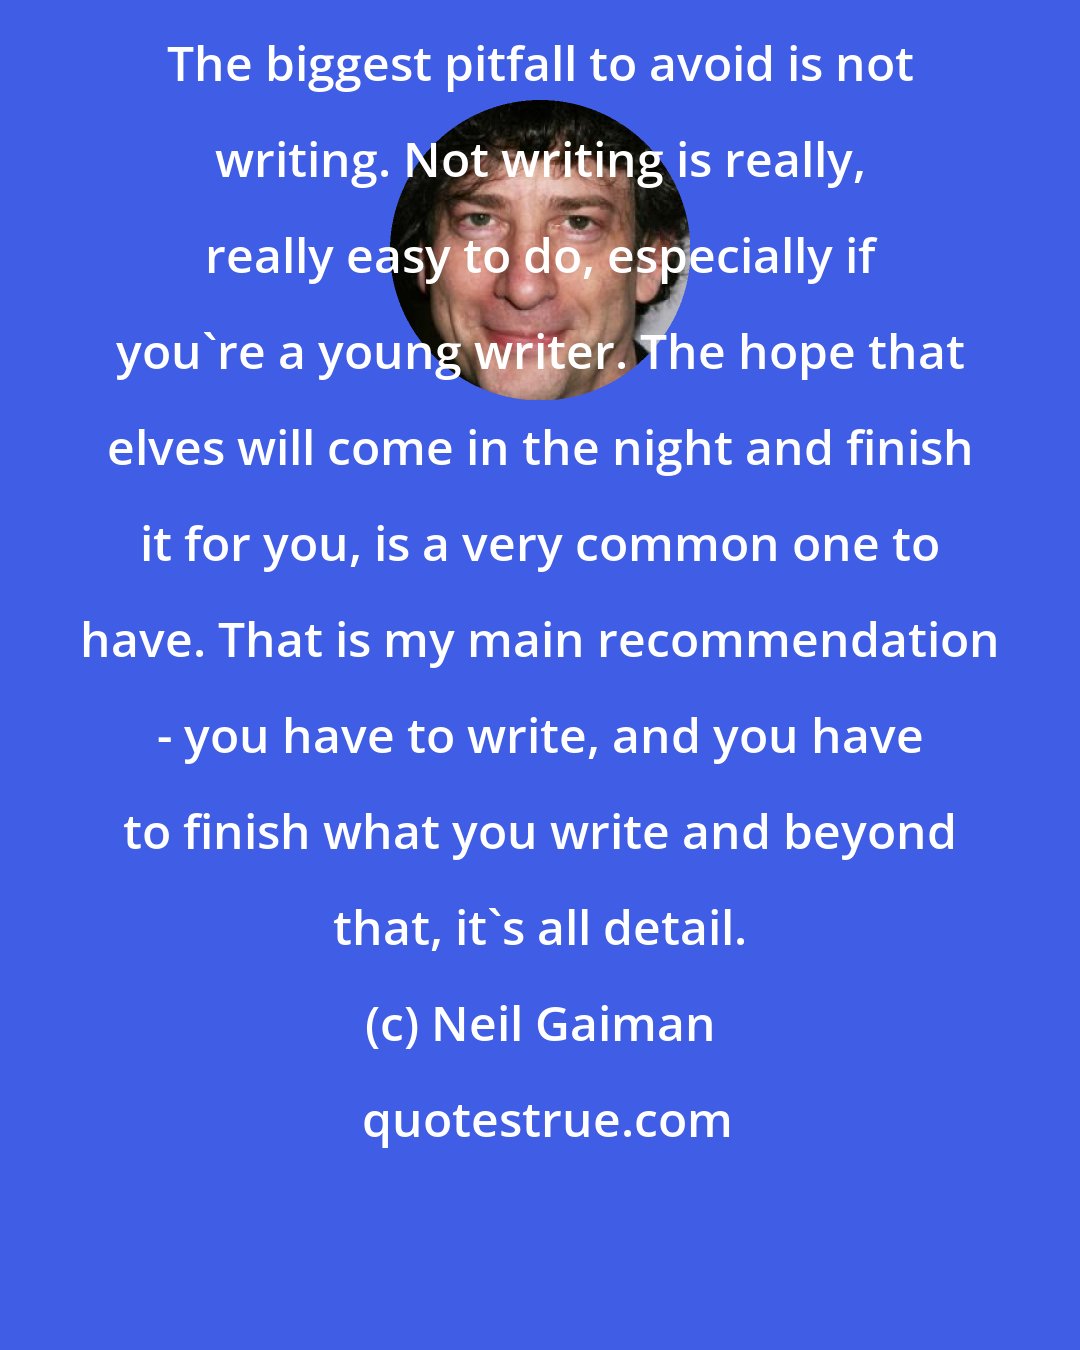 Neil Gaiman: The biggest pitfall to avoid is not writing. Not writing is really, really easy to do, especially if you're a young writer. The hope that elves will come in the night and finish it for you, is a very common one to have. That is my main recommendation - you have to write, and you have to finish what you write and beyond that, it's all detail.